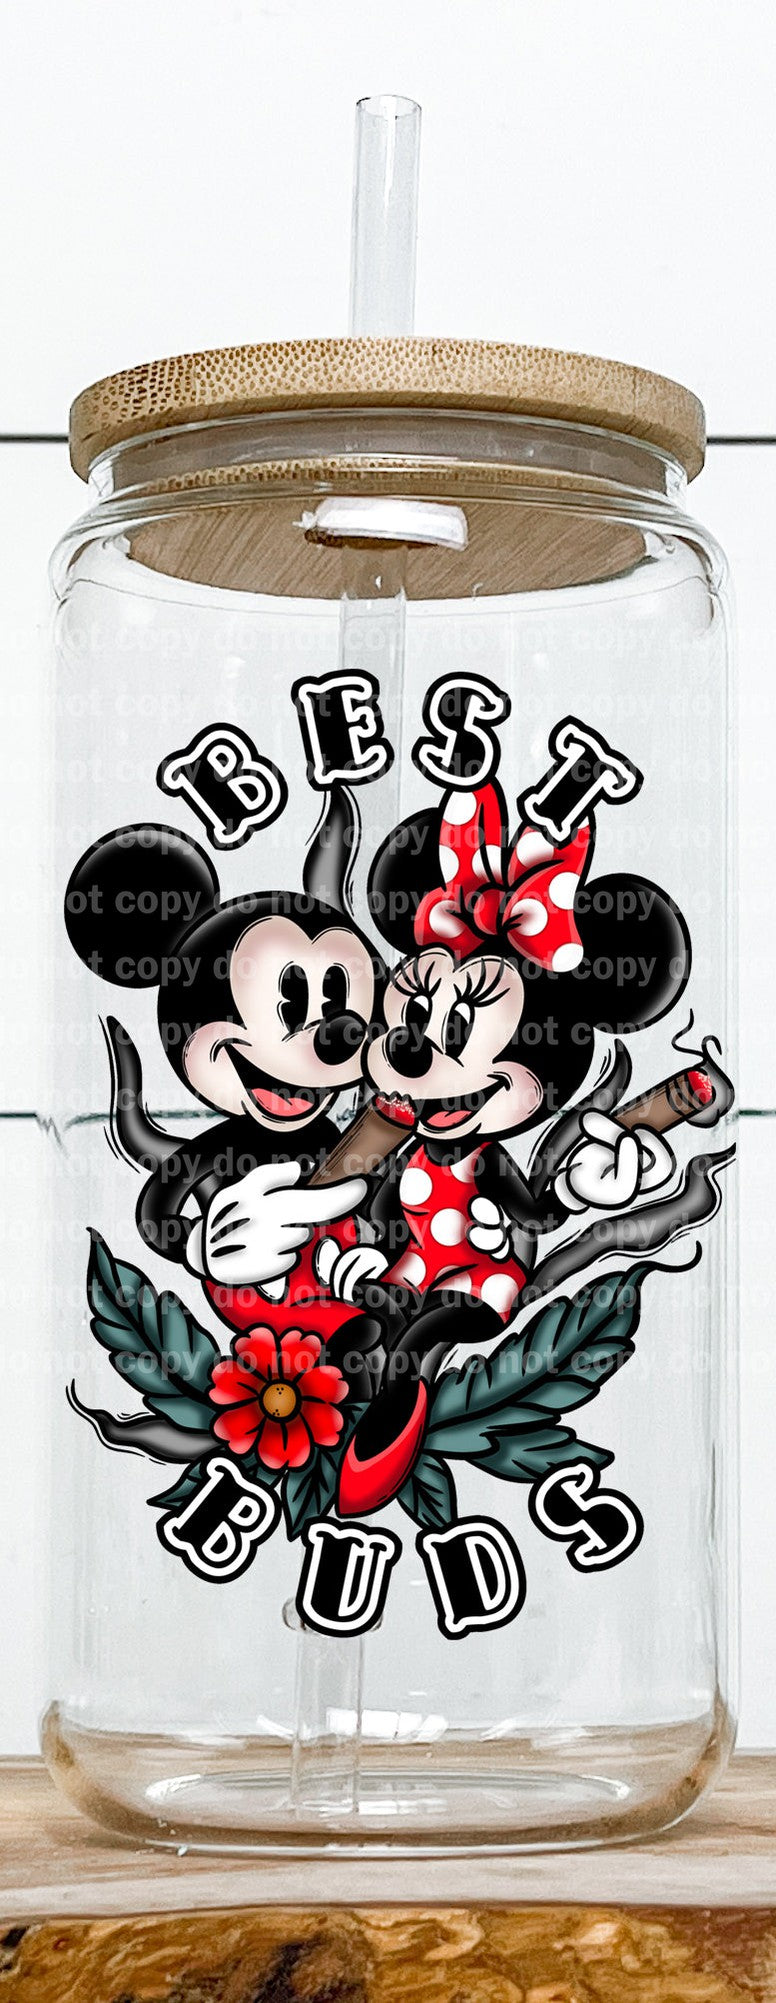 Best Buds Mouse Couple